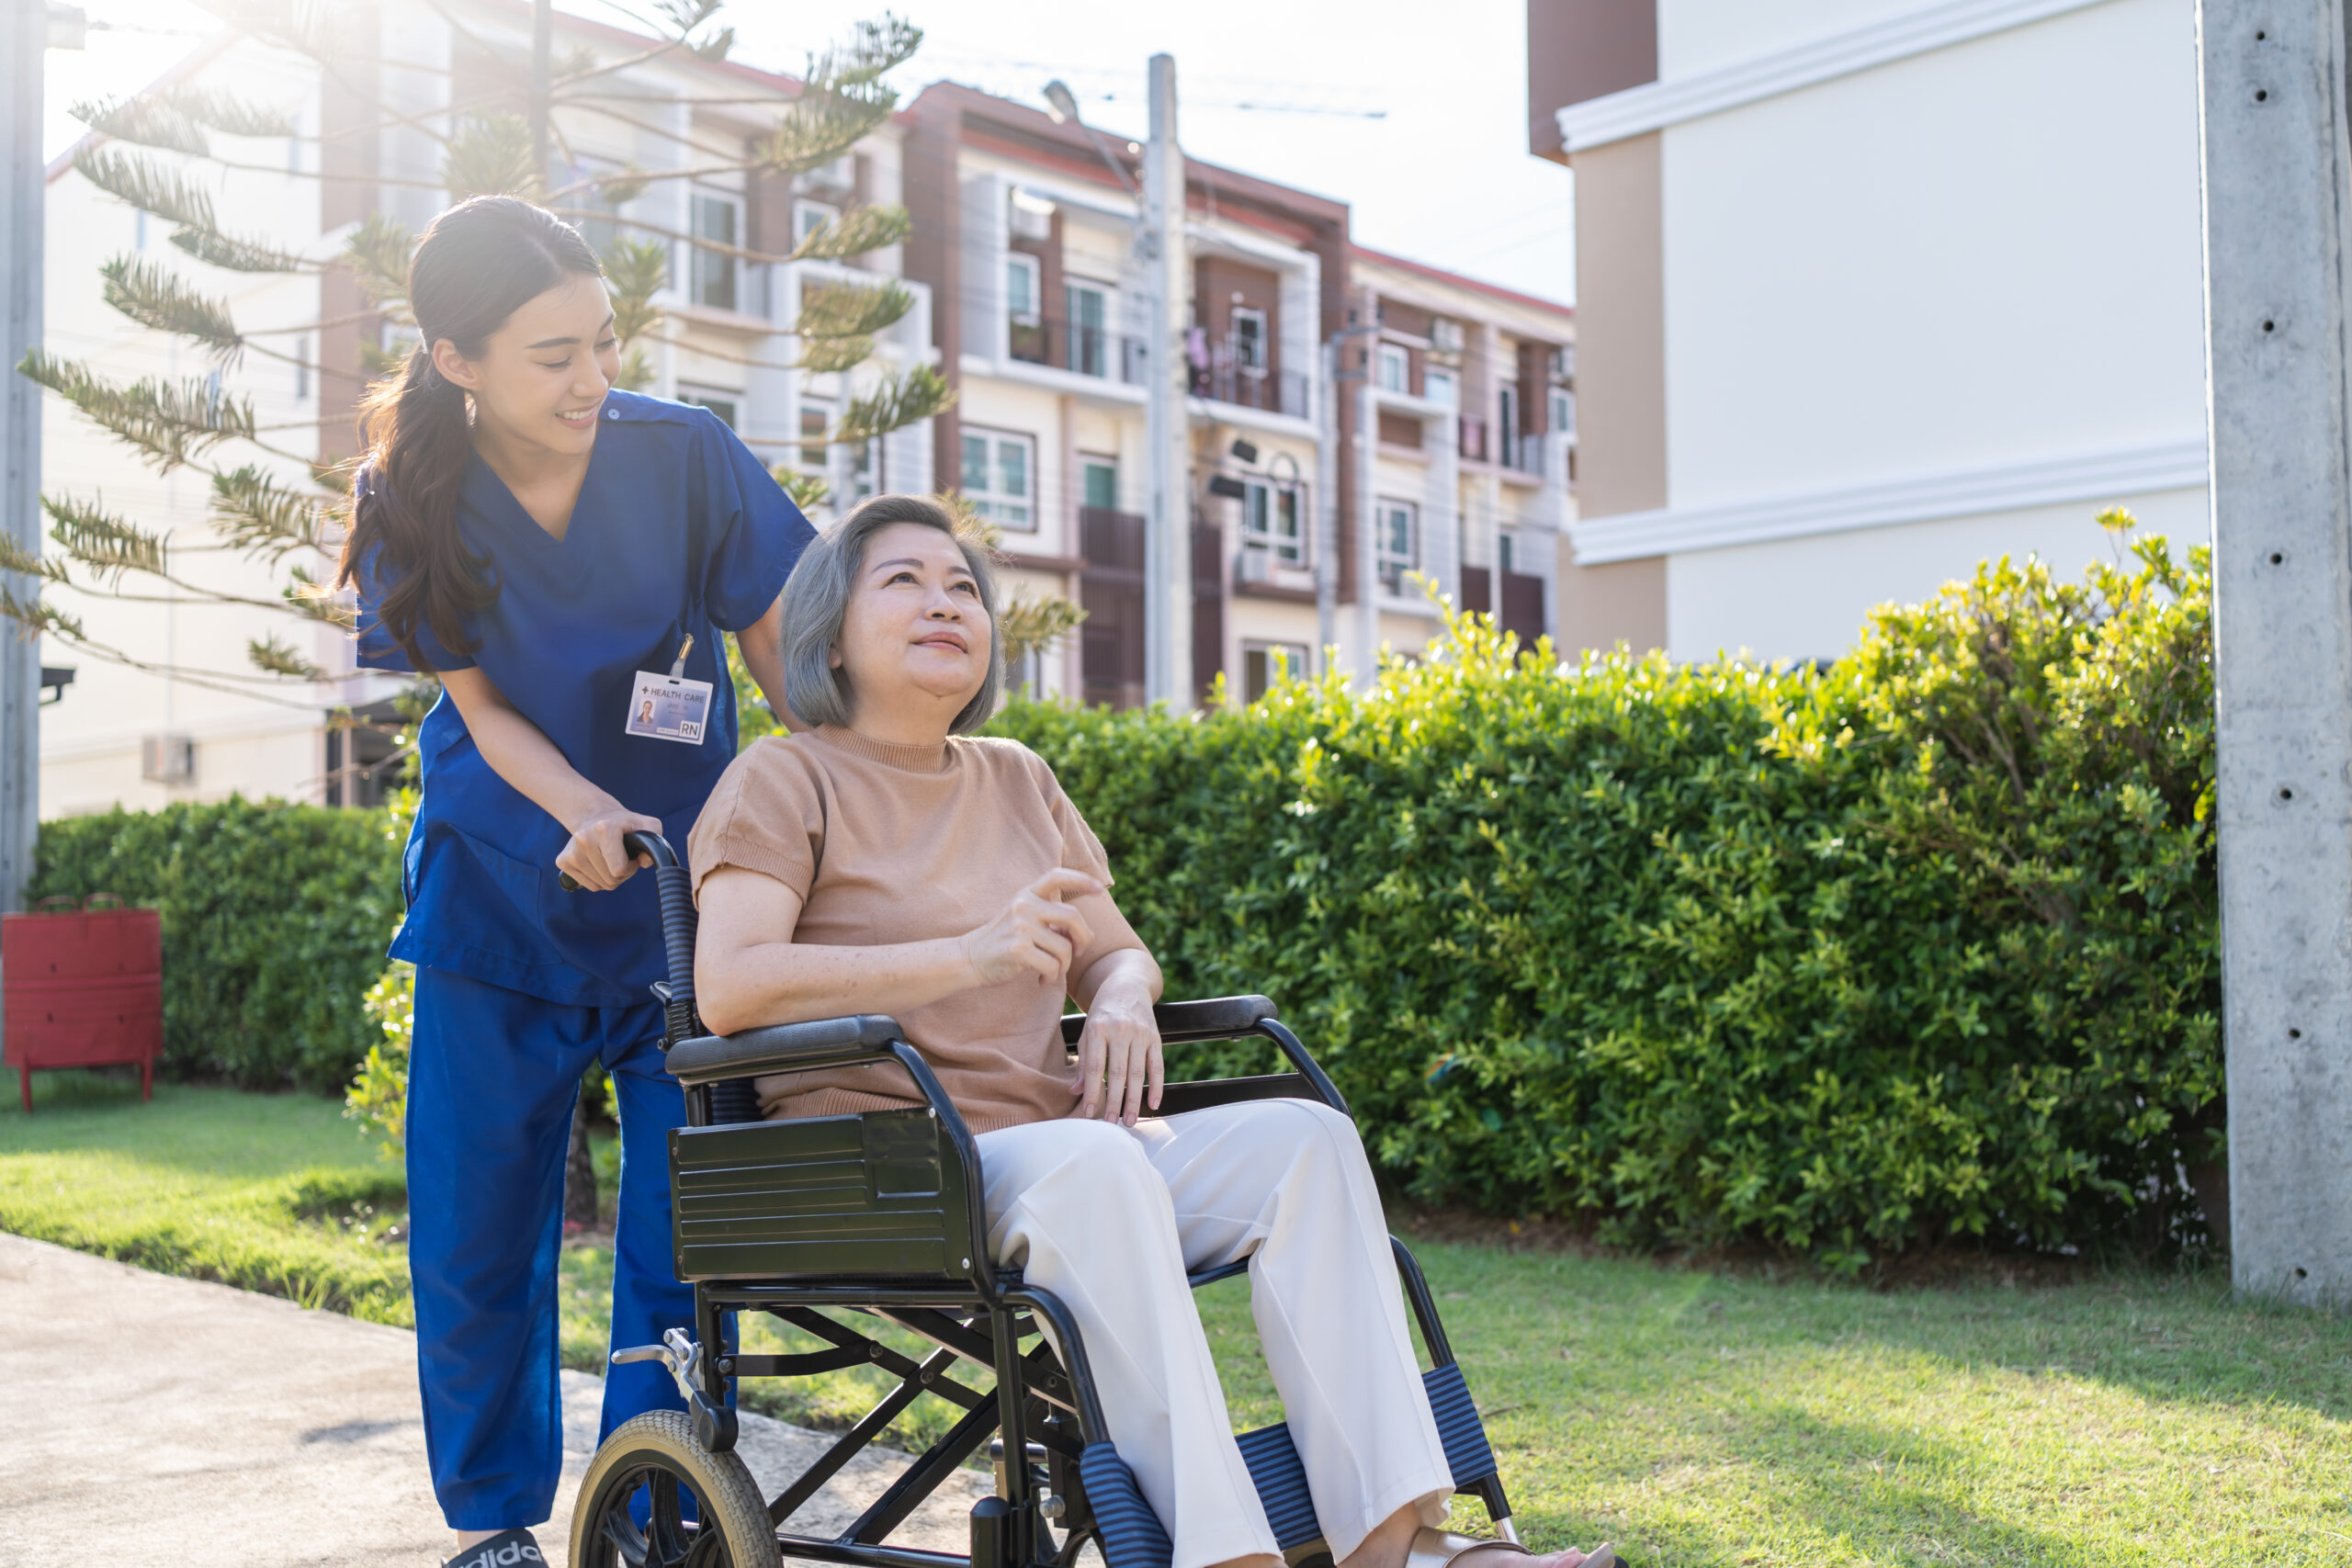 Female nursing assistant in blue scrubs pushes a disabled female patient in a wheelchair outside